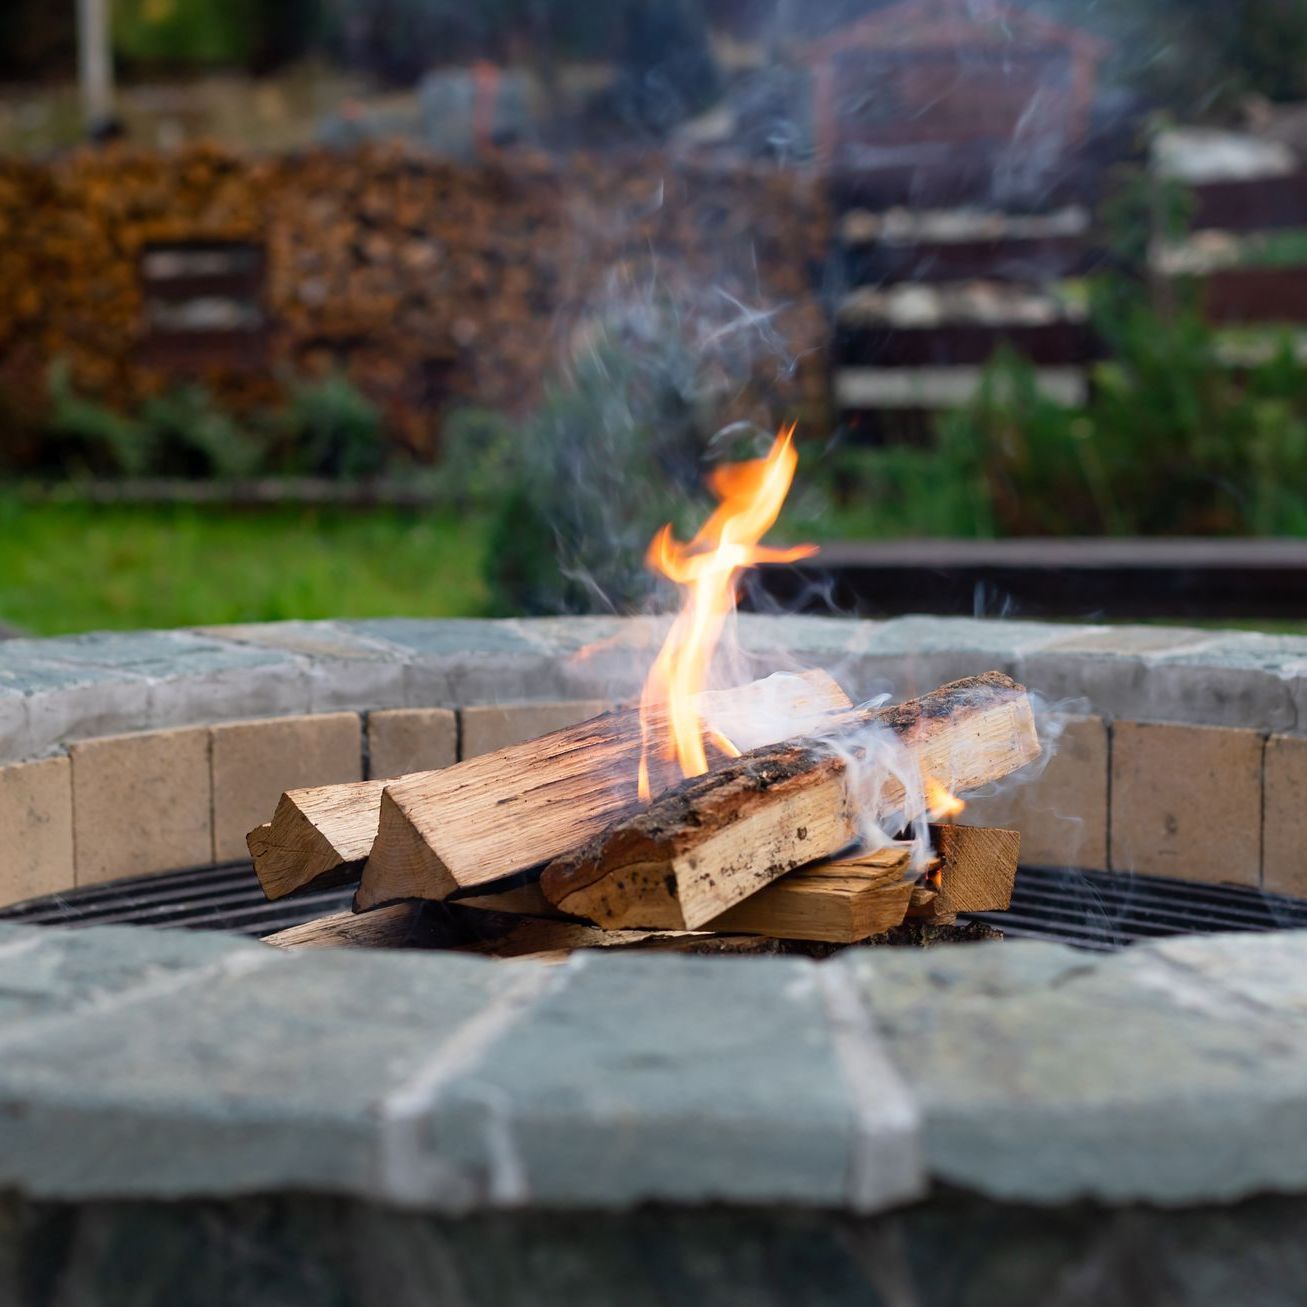 fireplace outdoor